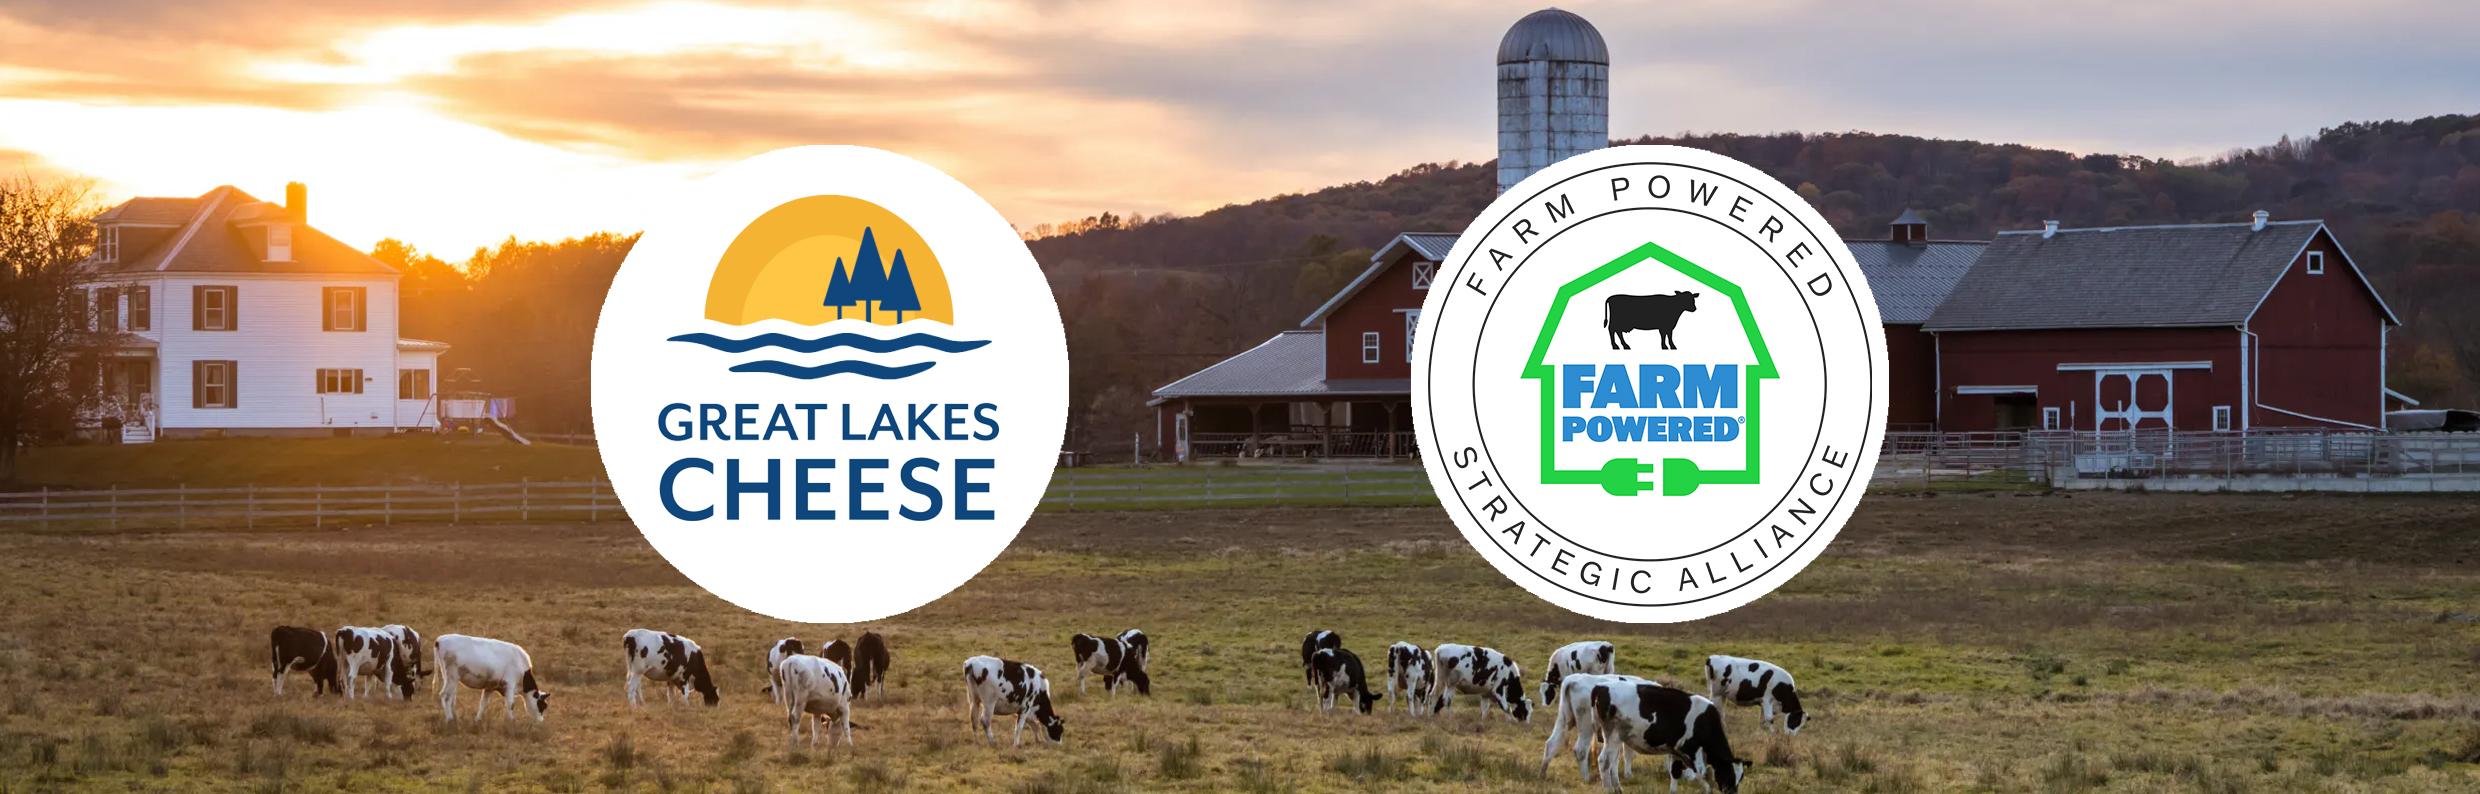 Logos of Great Lakes Cheese and Farm Powered Strategic Alliance, with a background image of a farm using anaerobic digestion